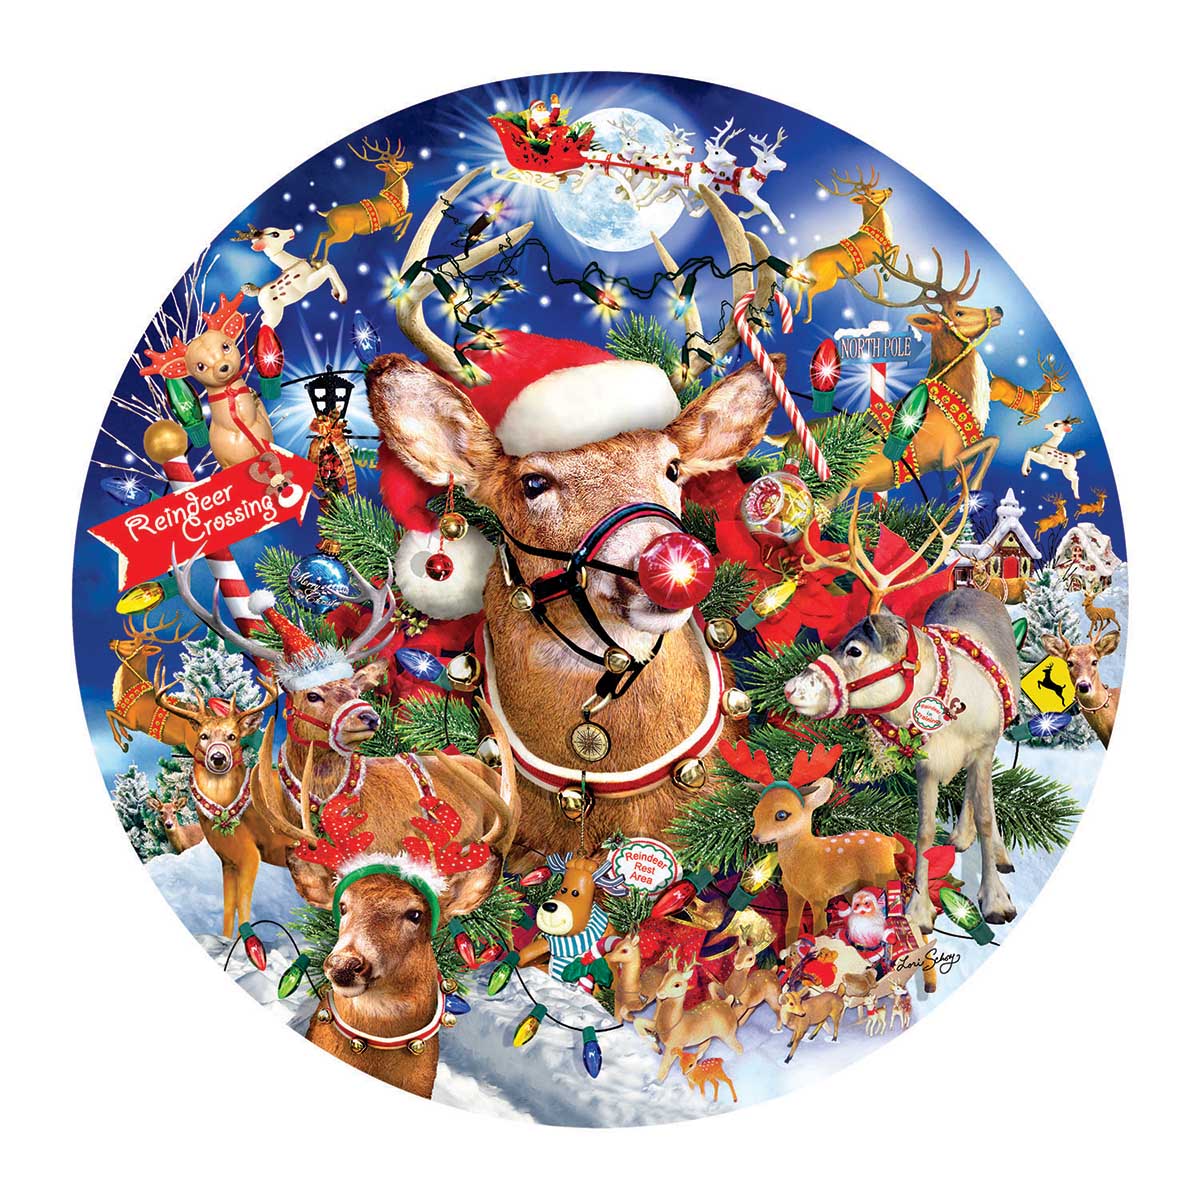 Reindeer Madness Christmas Jigsaw Puzzle